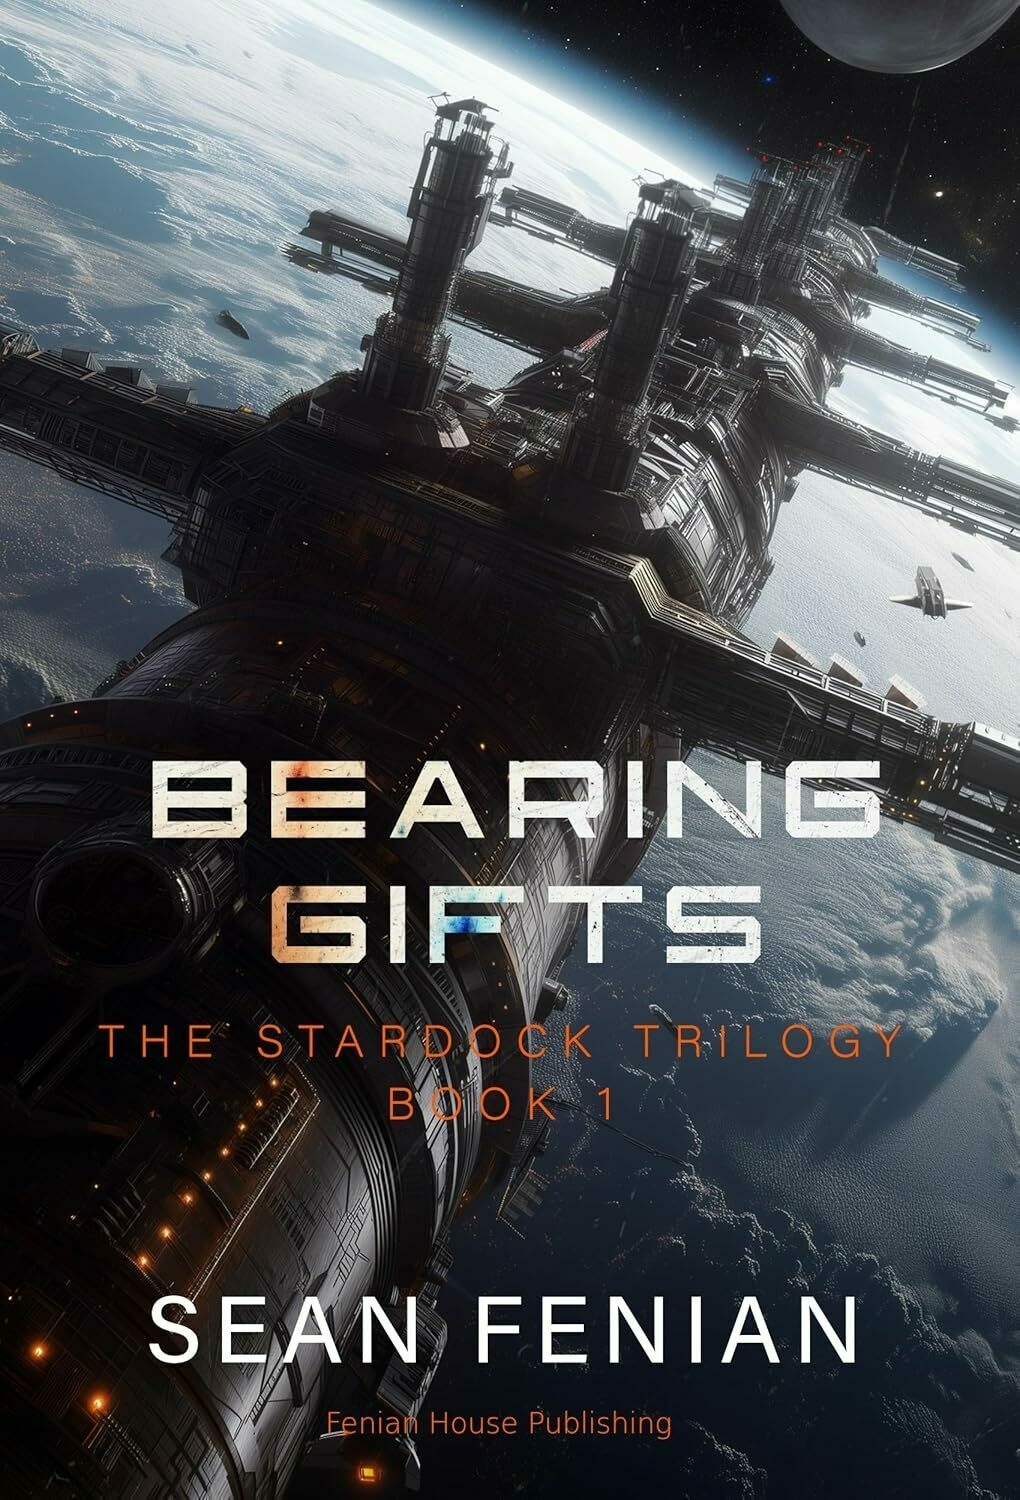 A space station hovers above a planet's surface, with a moon and a ship visible. Text reads: 'BEARING GIFTS, THE STARDOK TRILOGY BOOK 1, SEAN FENIAN, Fenian House Publishing.'